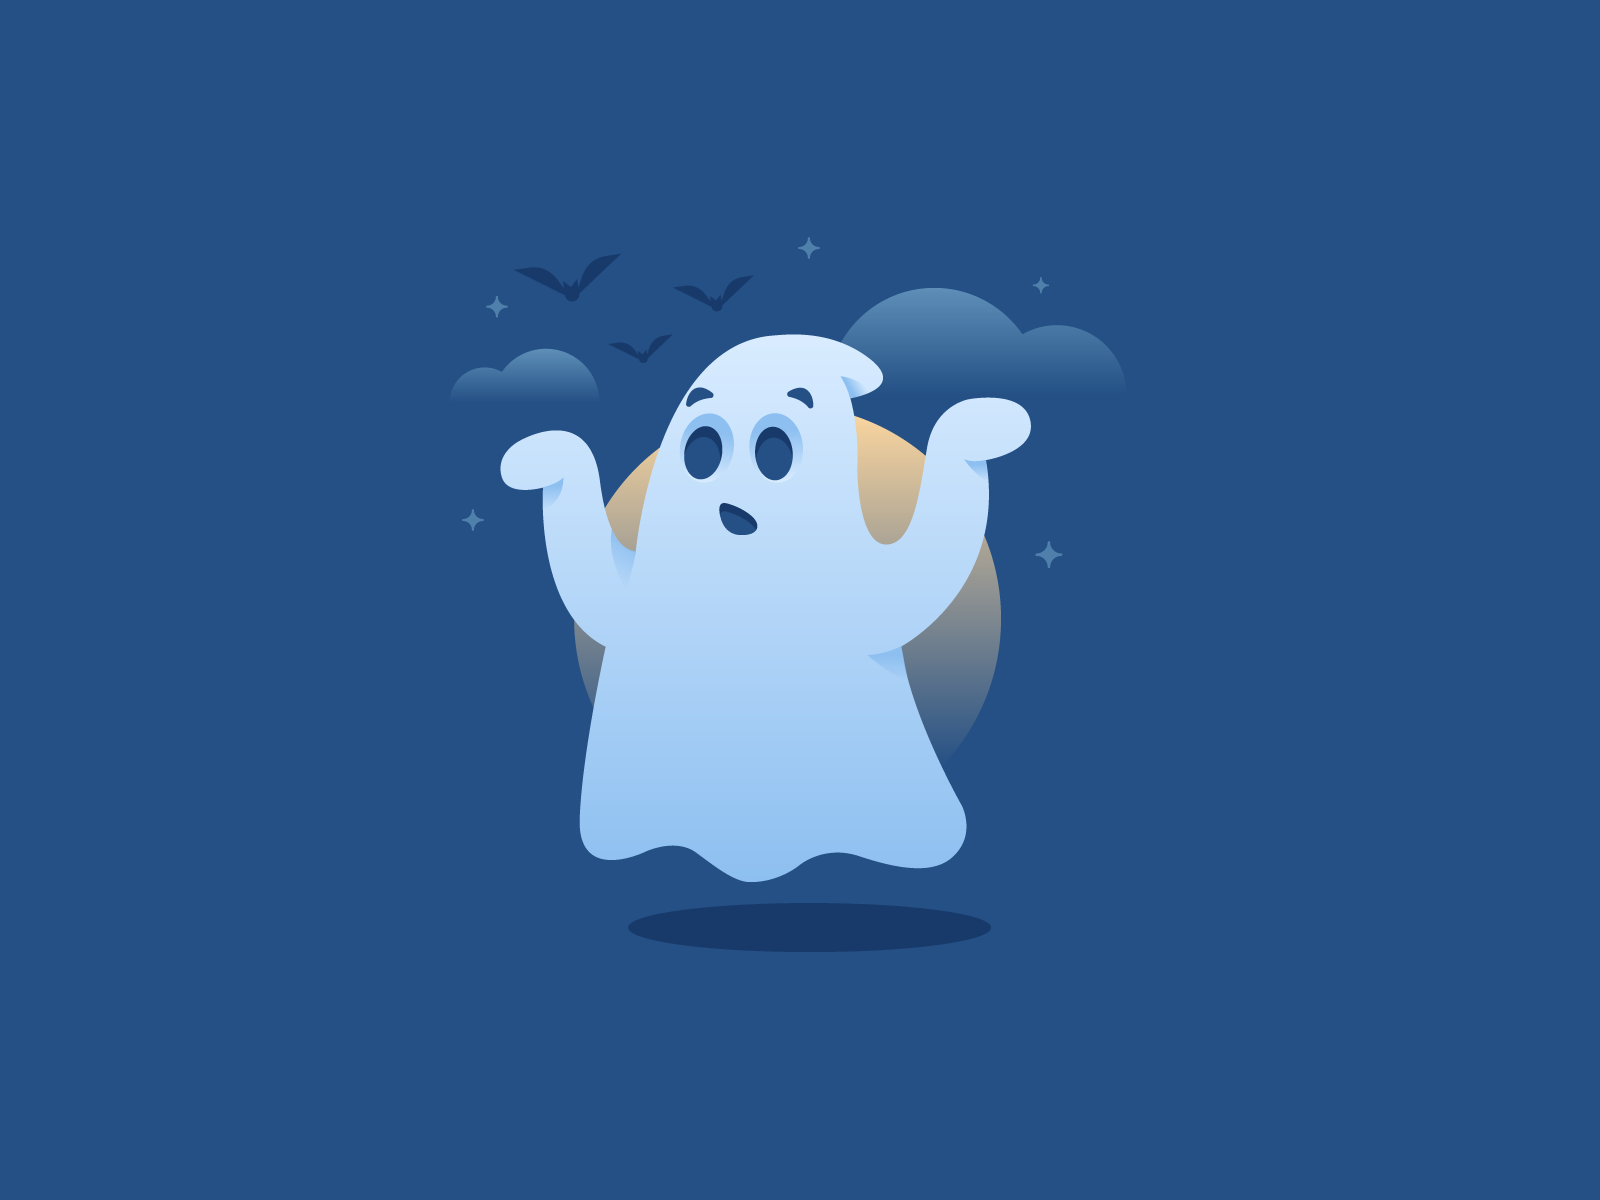 Boo 👻 by Mario Jacome for Tally on Dribbble